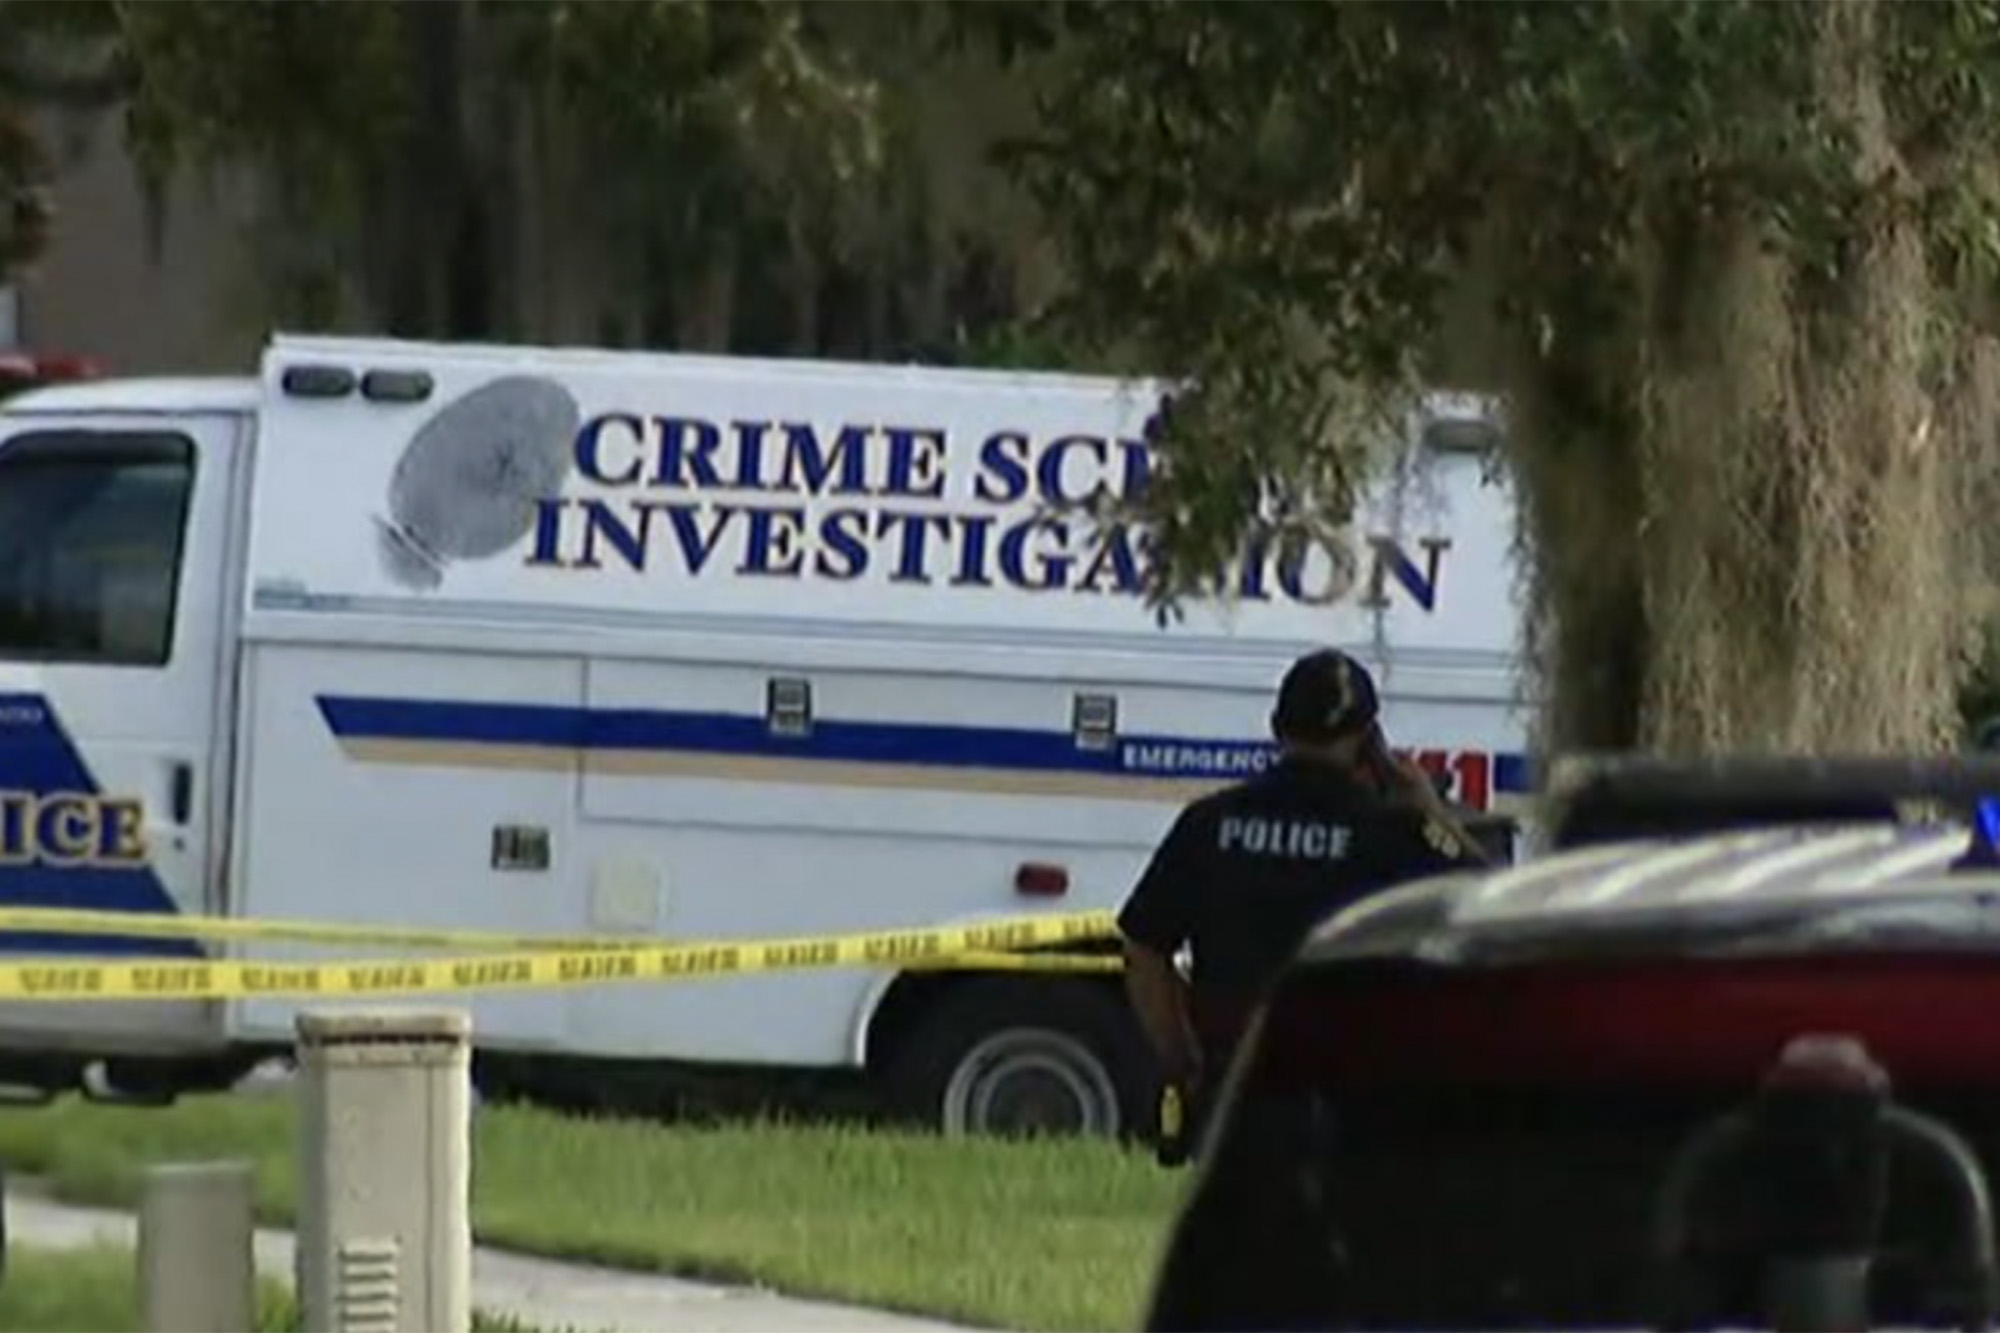 A family of five died in an apparent murder-suicide at an Orlando home on Tuesday. (Fox 35 Orlando)